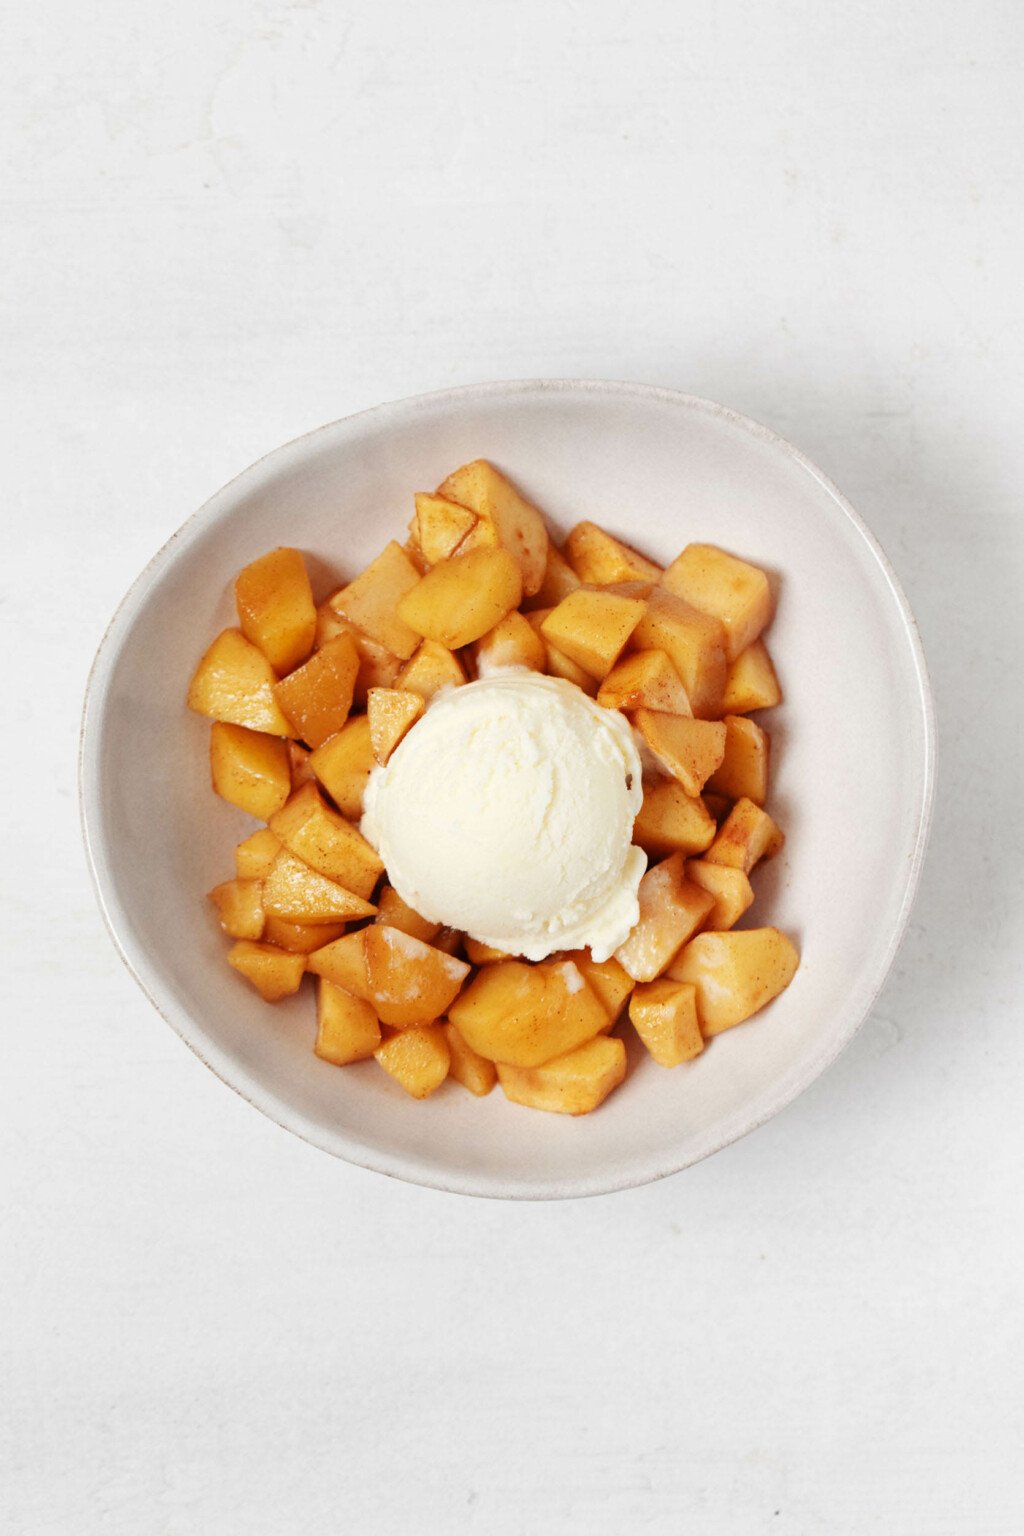 An image of a white bowl of baked apples, topped with a round scoop of vanilla ice cream.